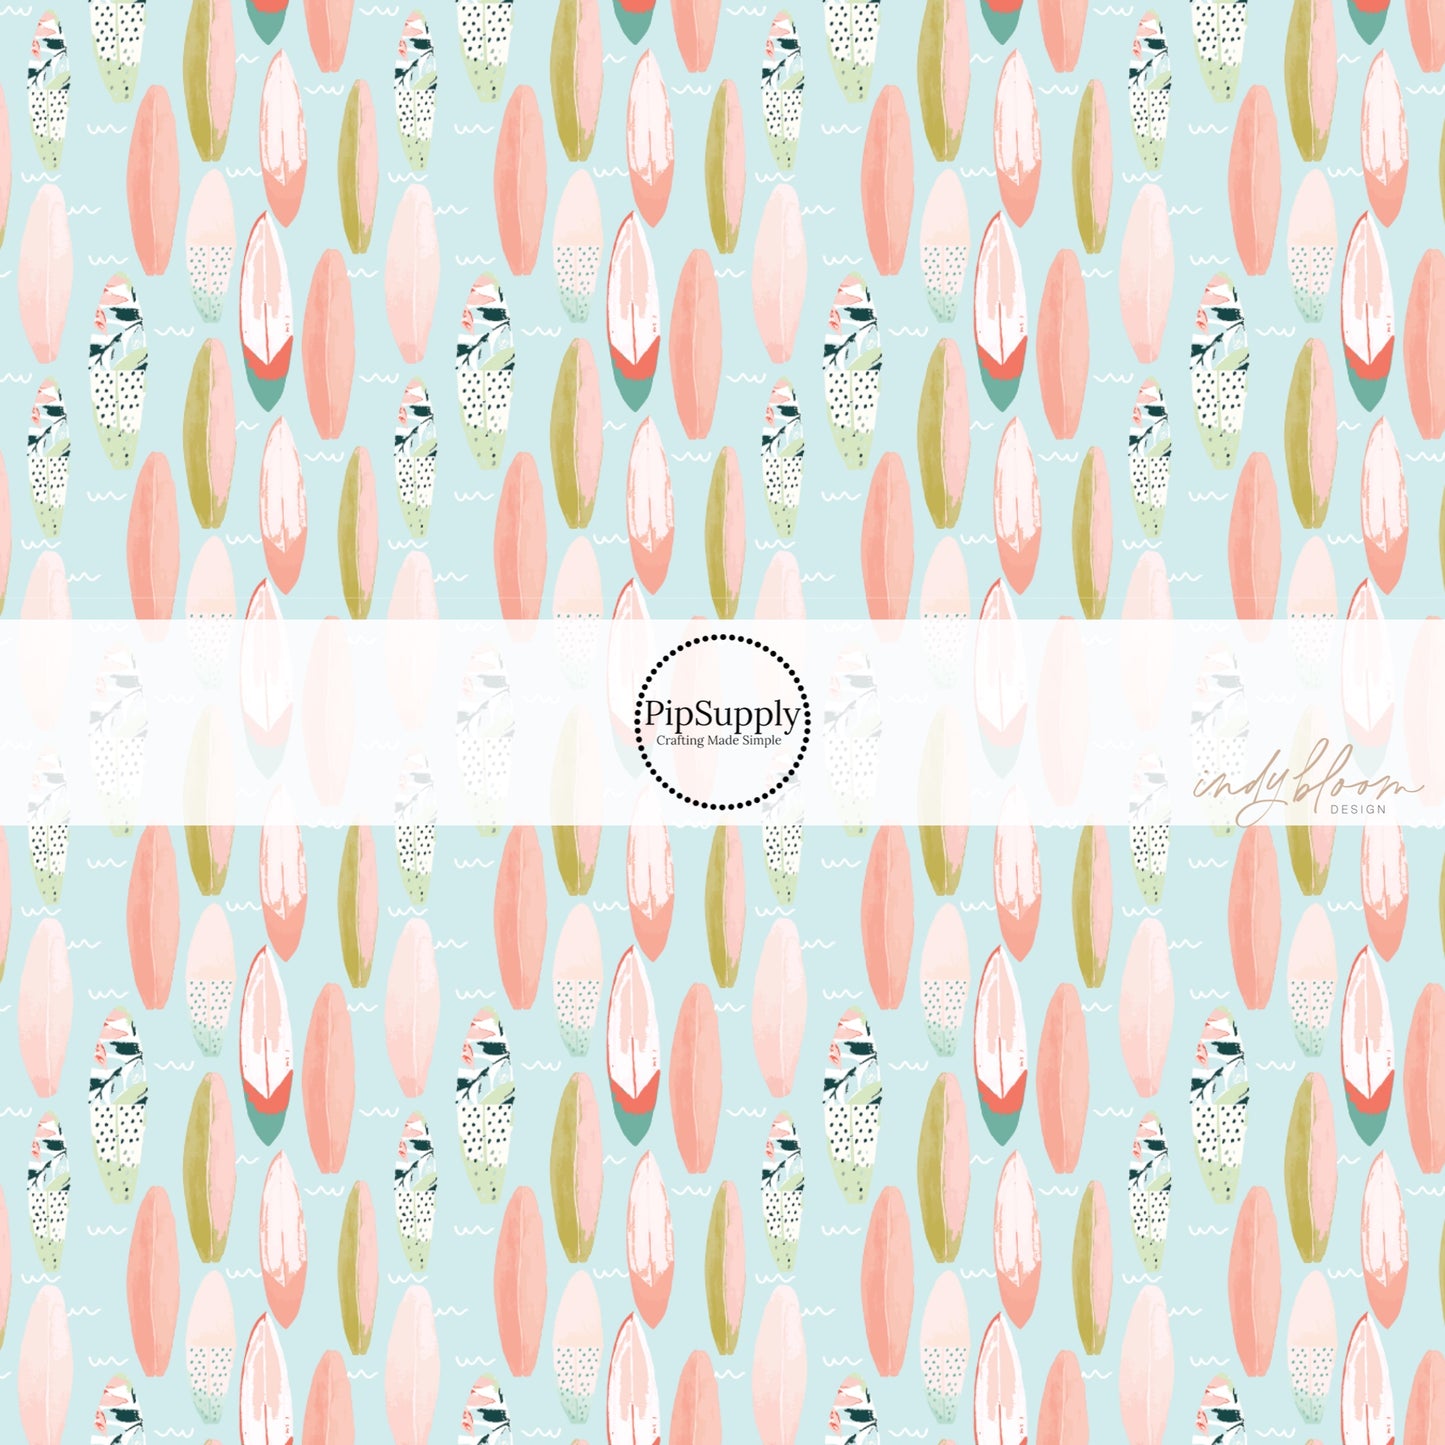 Waves, floral, peach, and green surfboards on light blue bow strips